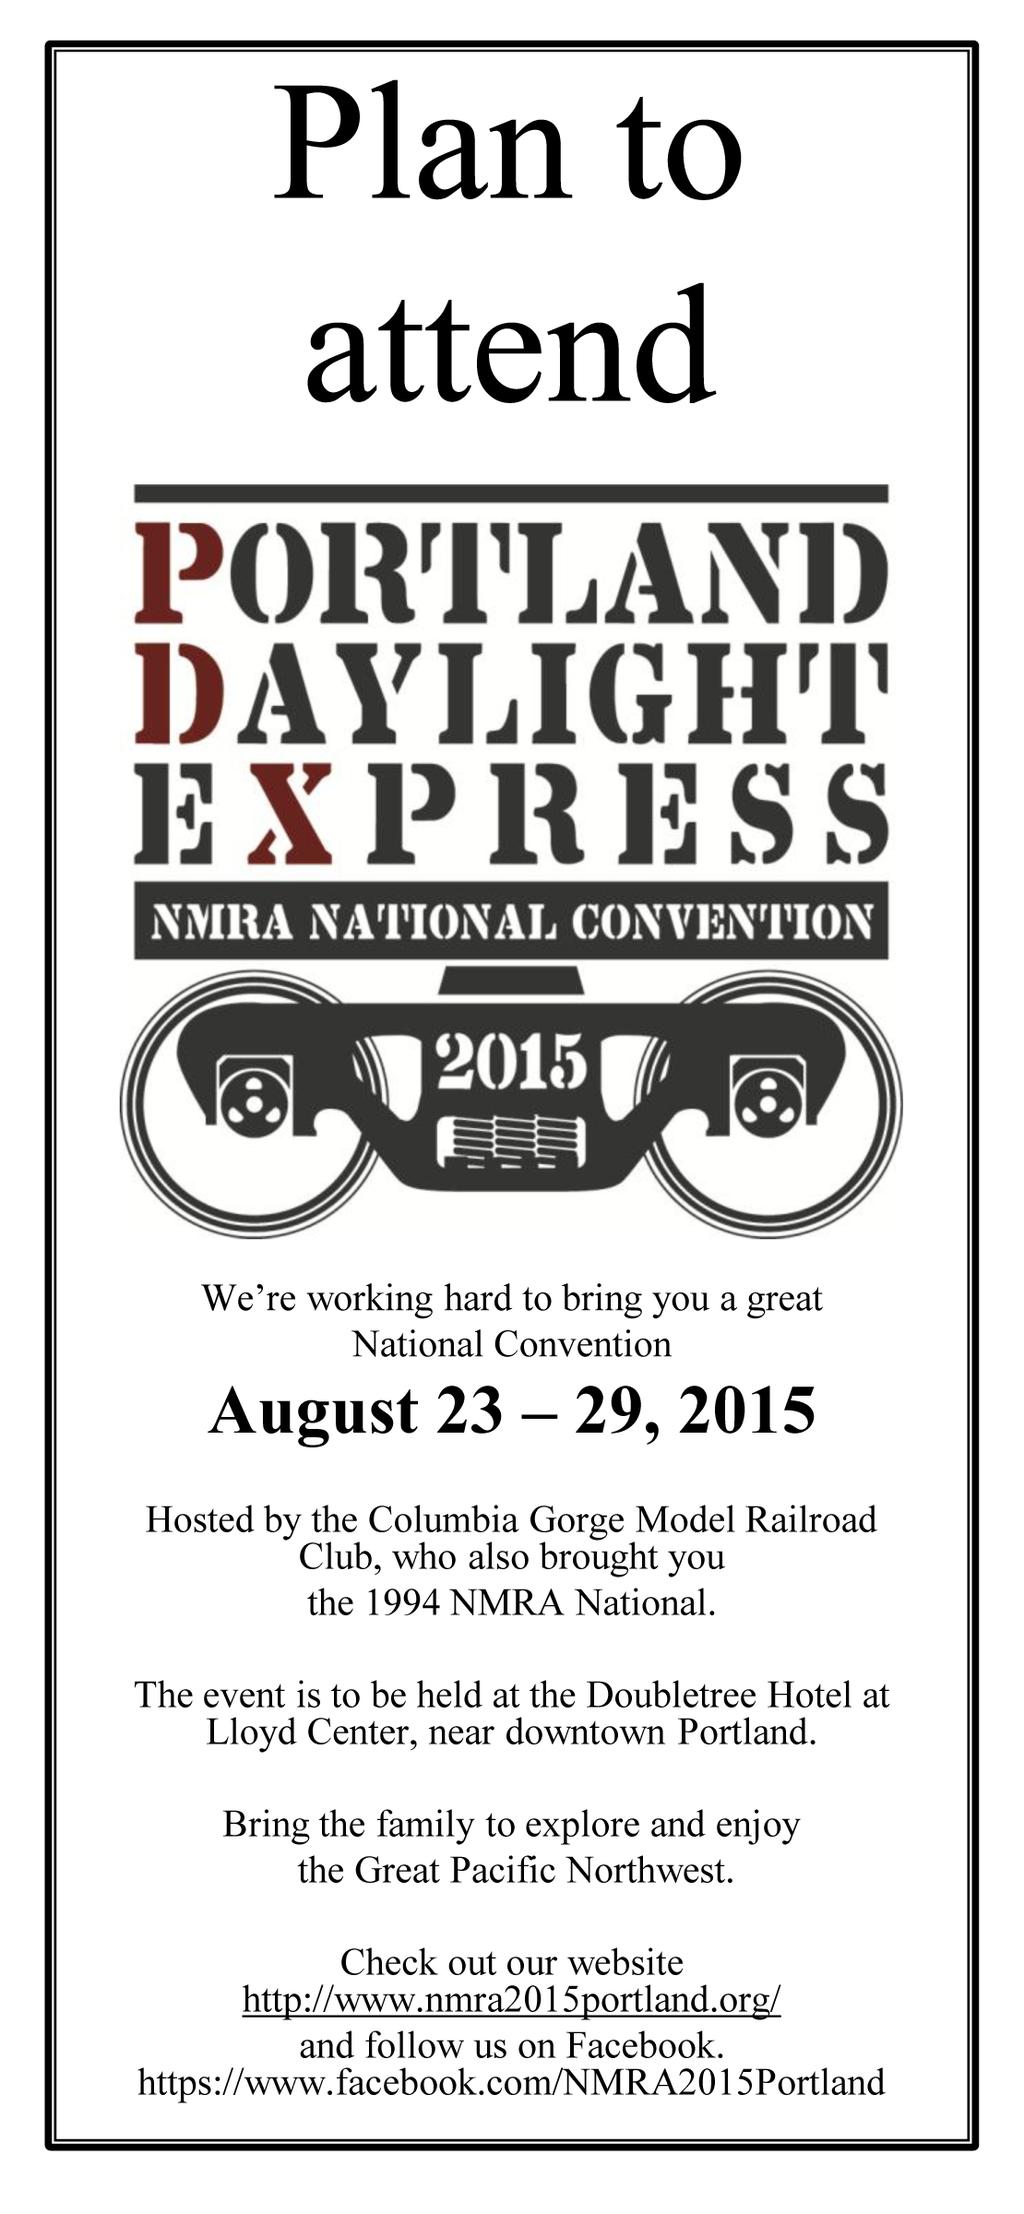 6 NMRA National Convention Portland 2015 Portland Daylight Express 80 th NMRA National convention Dates of event: August 23 29, 2015 Location: Double Tree by Hilton Hotel Portland at Lloyd Center,